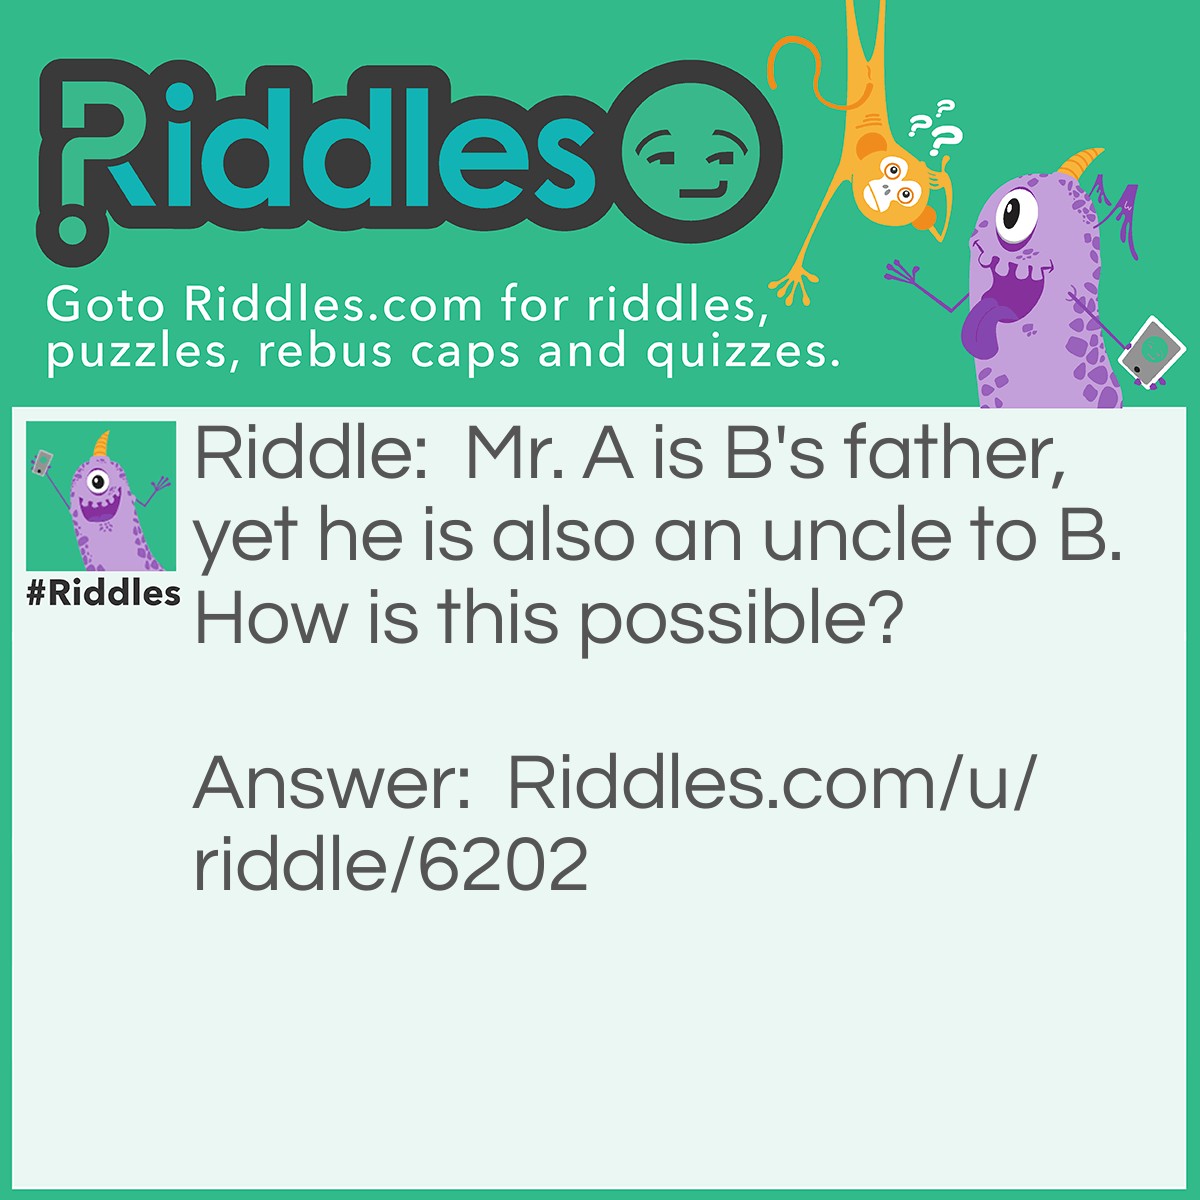 Riddle: Mr. A is B's father, yet he is also an uncle to B. How is this possible? Answer: Mr A is a stepfather to B (not biological father). He married B's mother after the death of his brother, B's biological father. Hence he is said to be B's father and uncle.